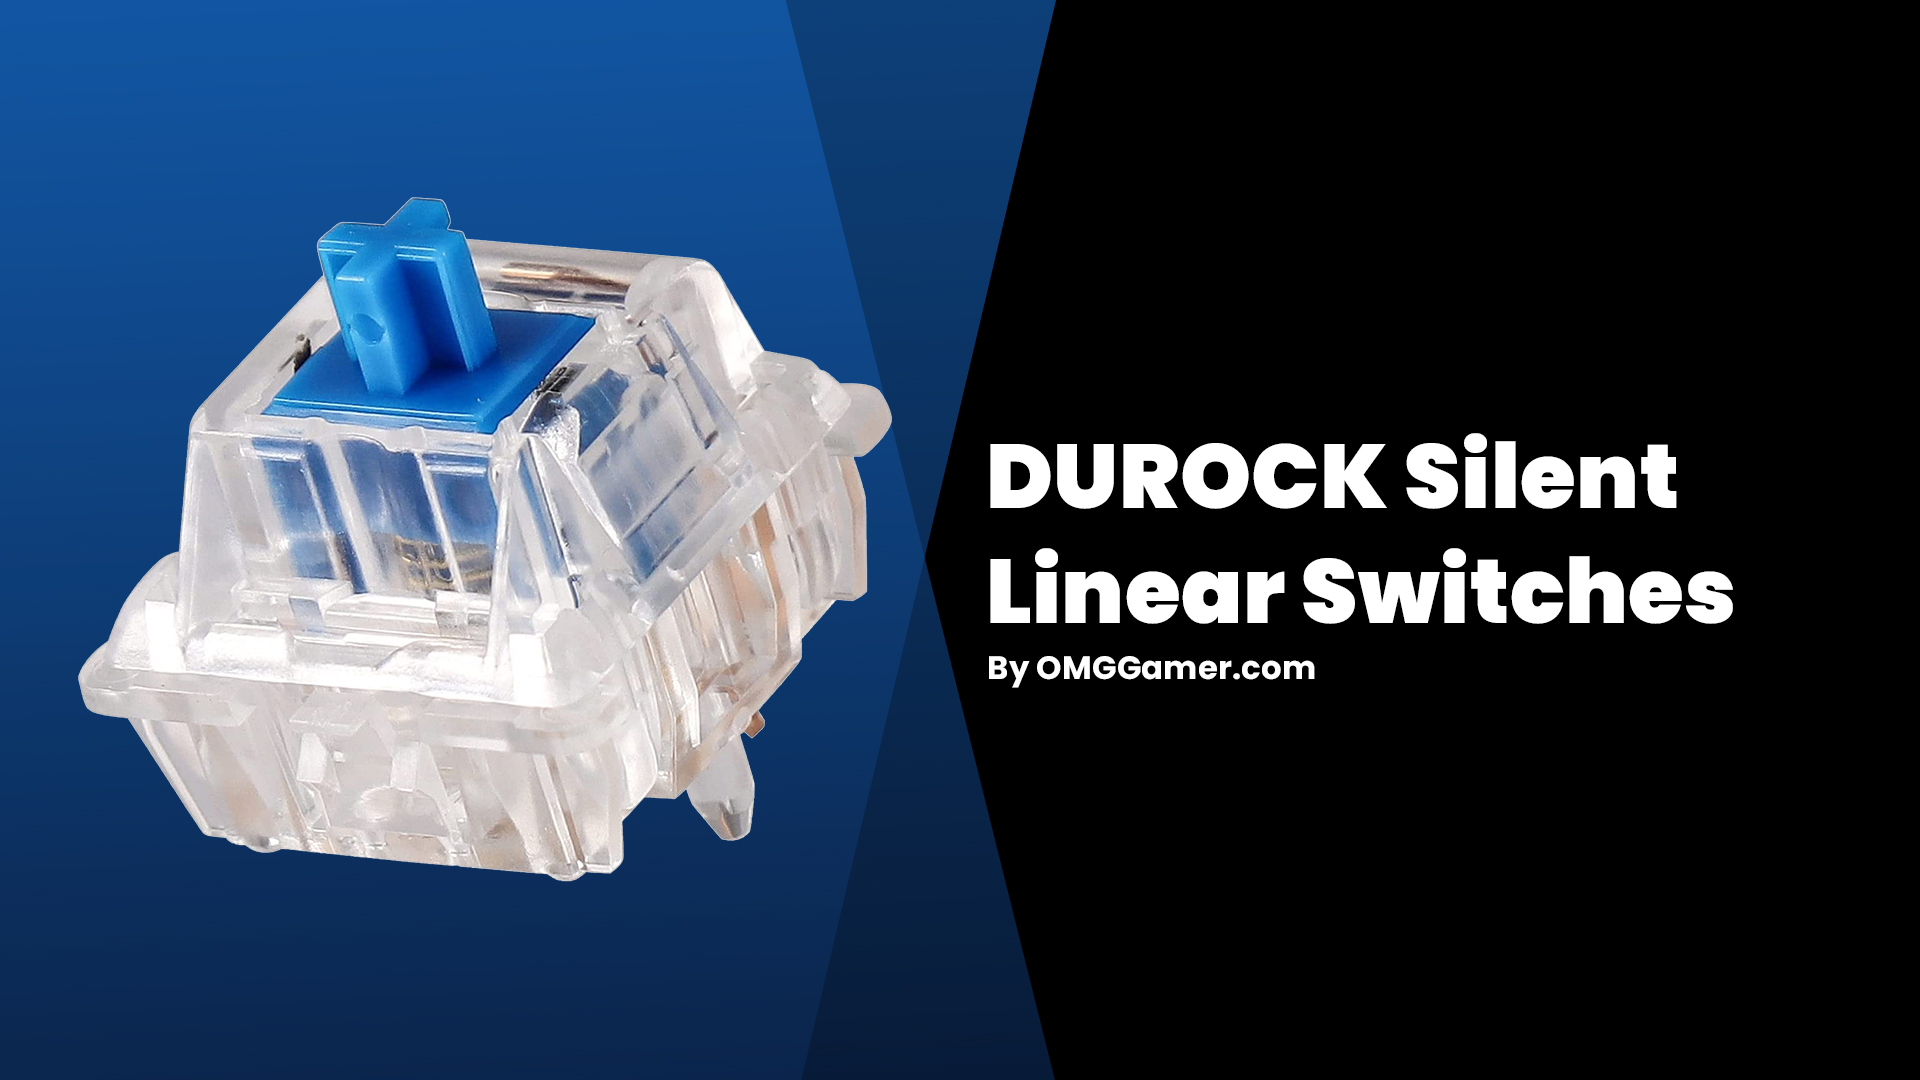 DUROCK Silent Linear Switches